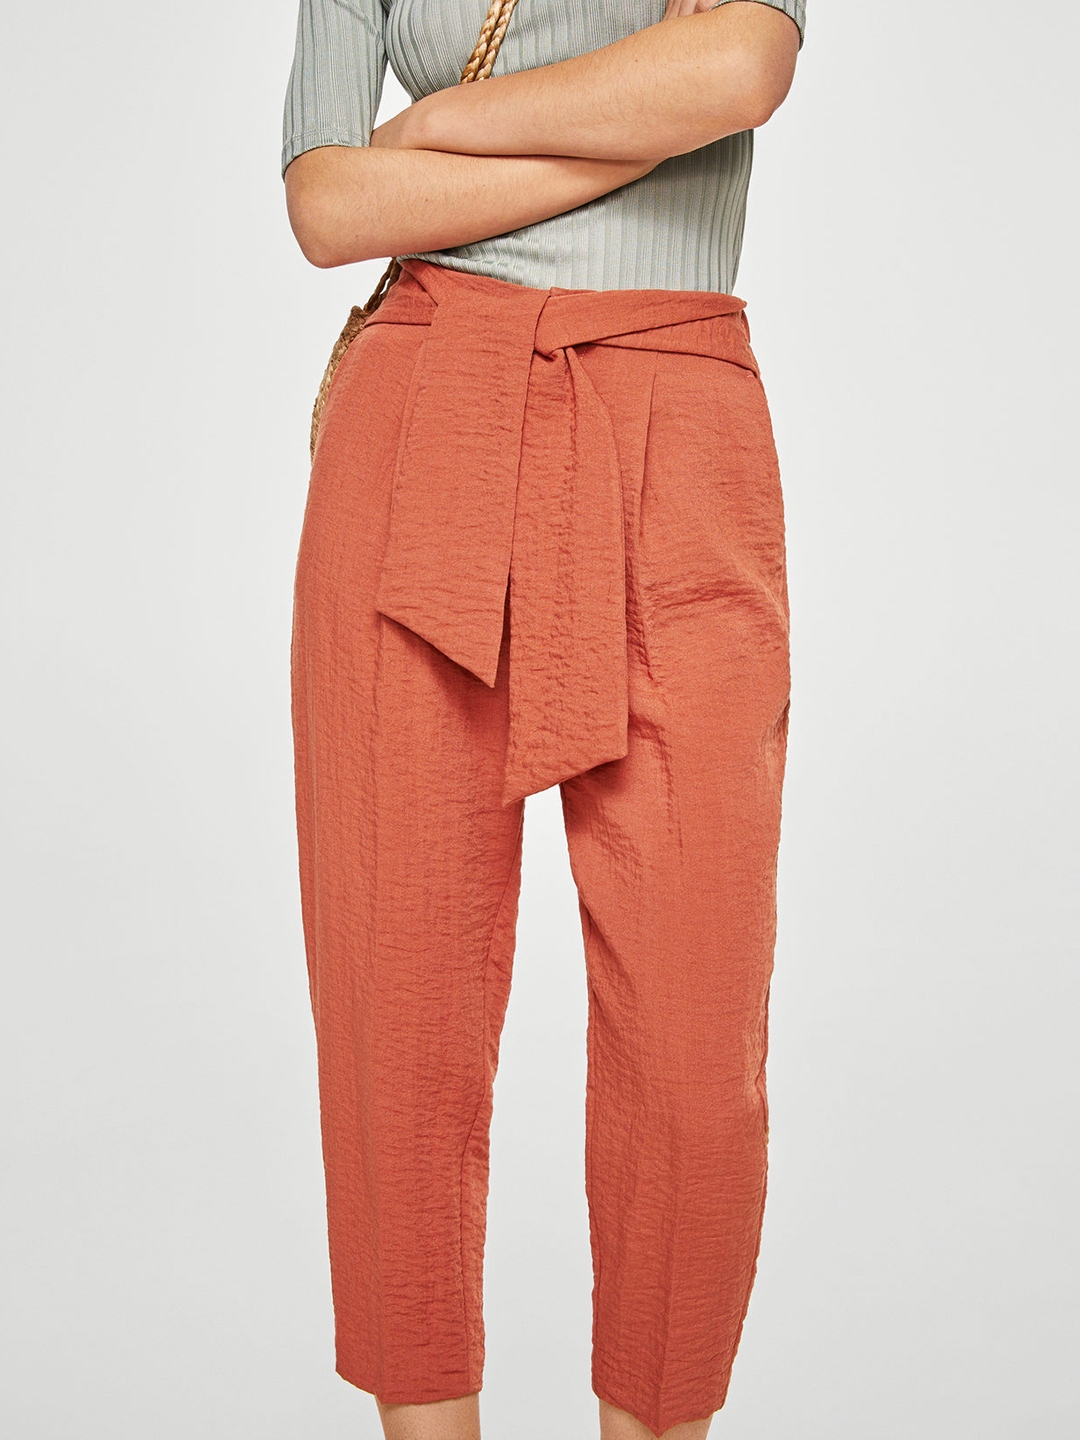 Buy FKNS Womens Rust Jogger Pants With Paperbag Waist  Shoppers Stop